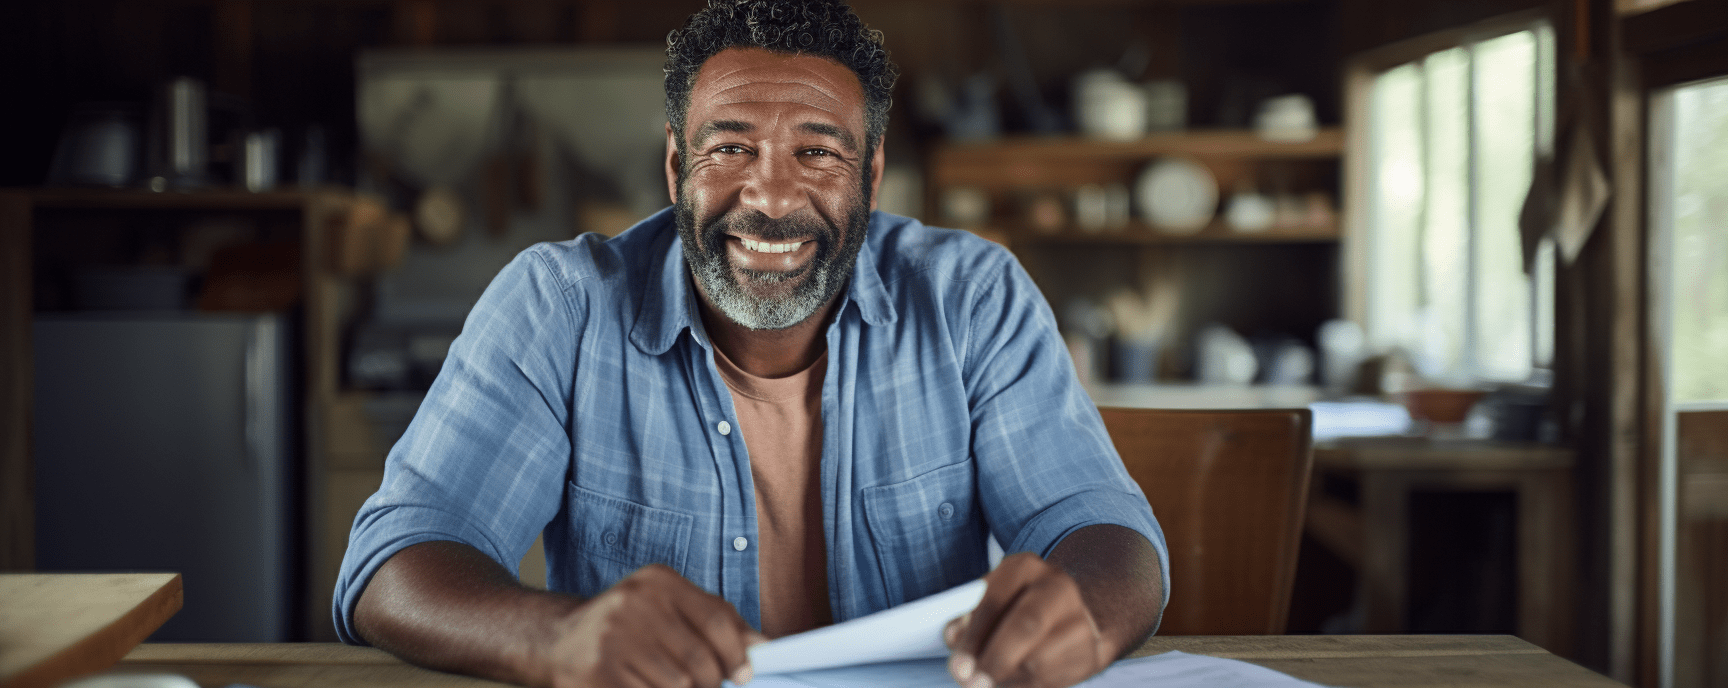 Man happily reading TEFAP approval letter